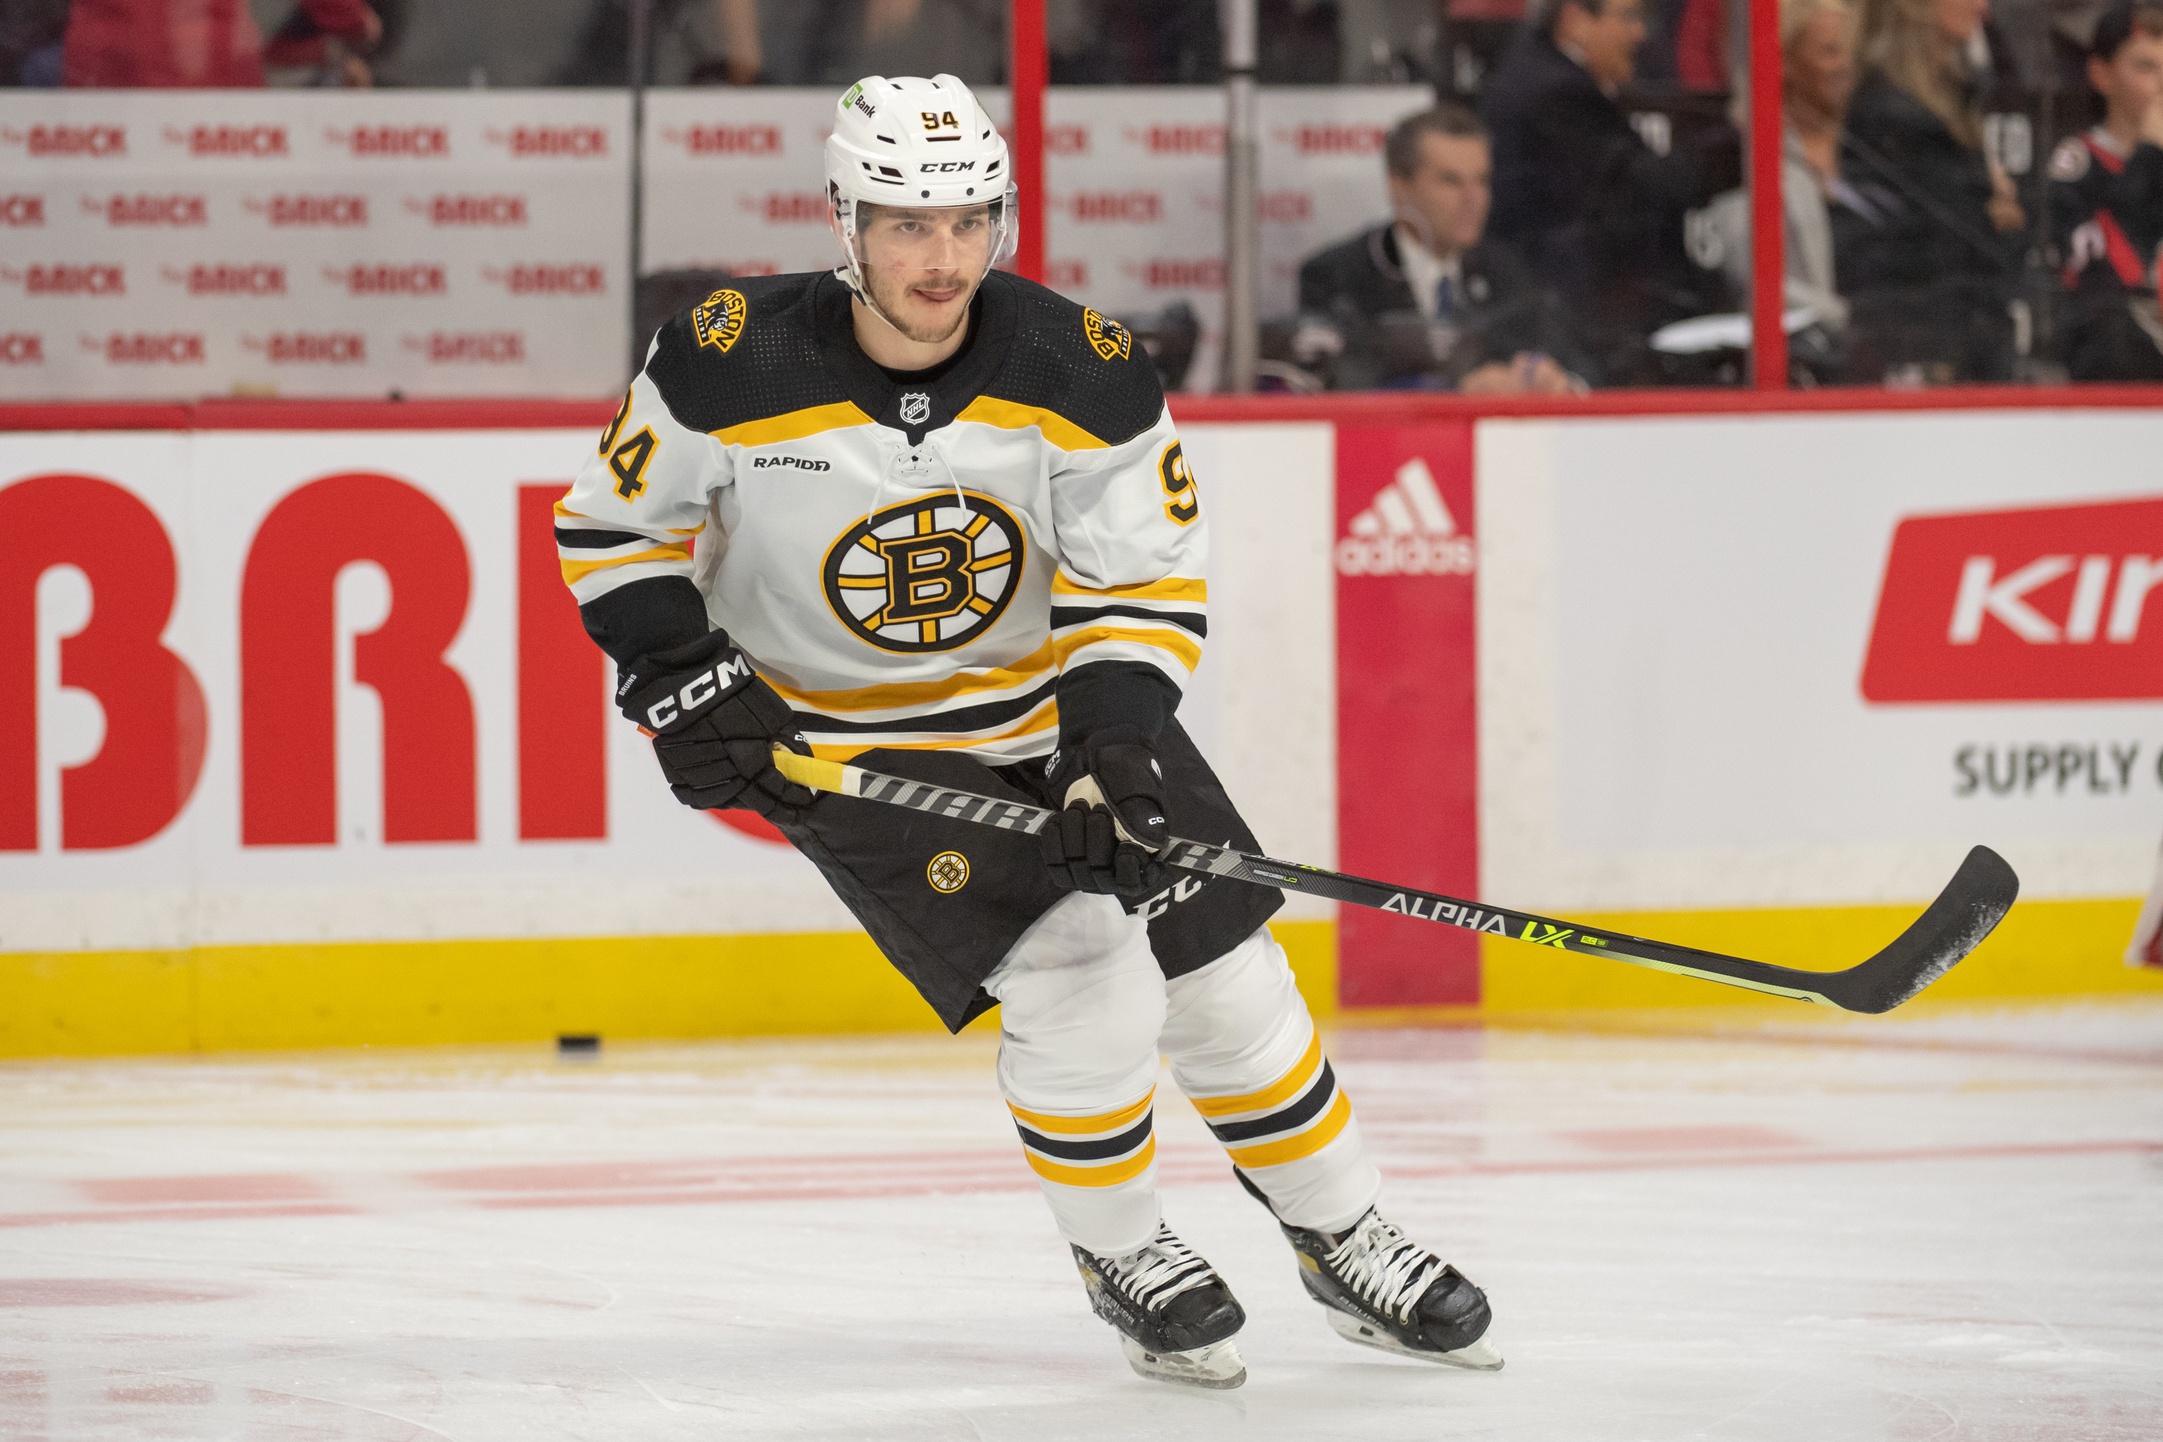 Oct 18, 2022; Ottawa, Ontario, CAN; Boston Bruins center Jakub Lauko (94) skates during warmup prior to game against the  Ottawa Senators at the Canadian Tire Centre. Mandatory Credit: Marc DesRosiers-USA TODAY Sports